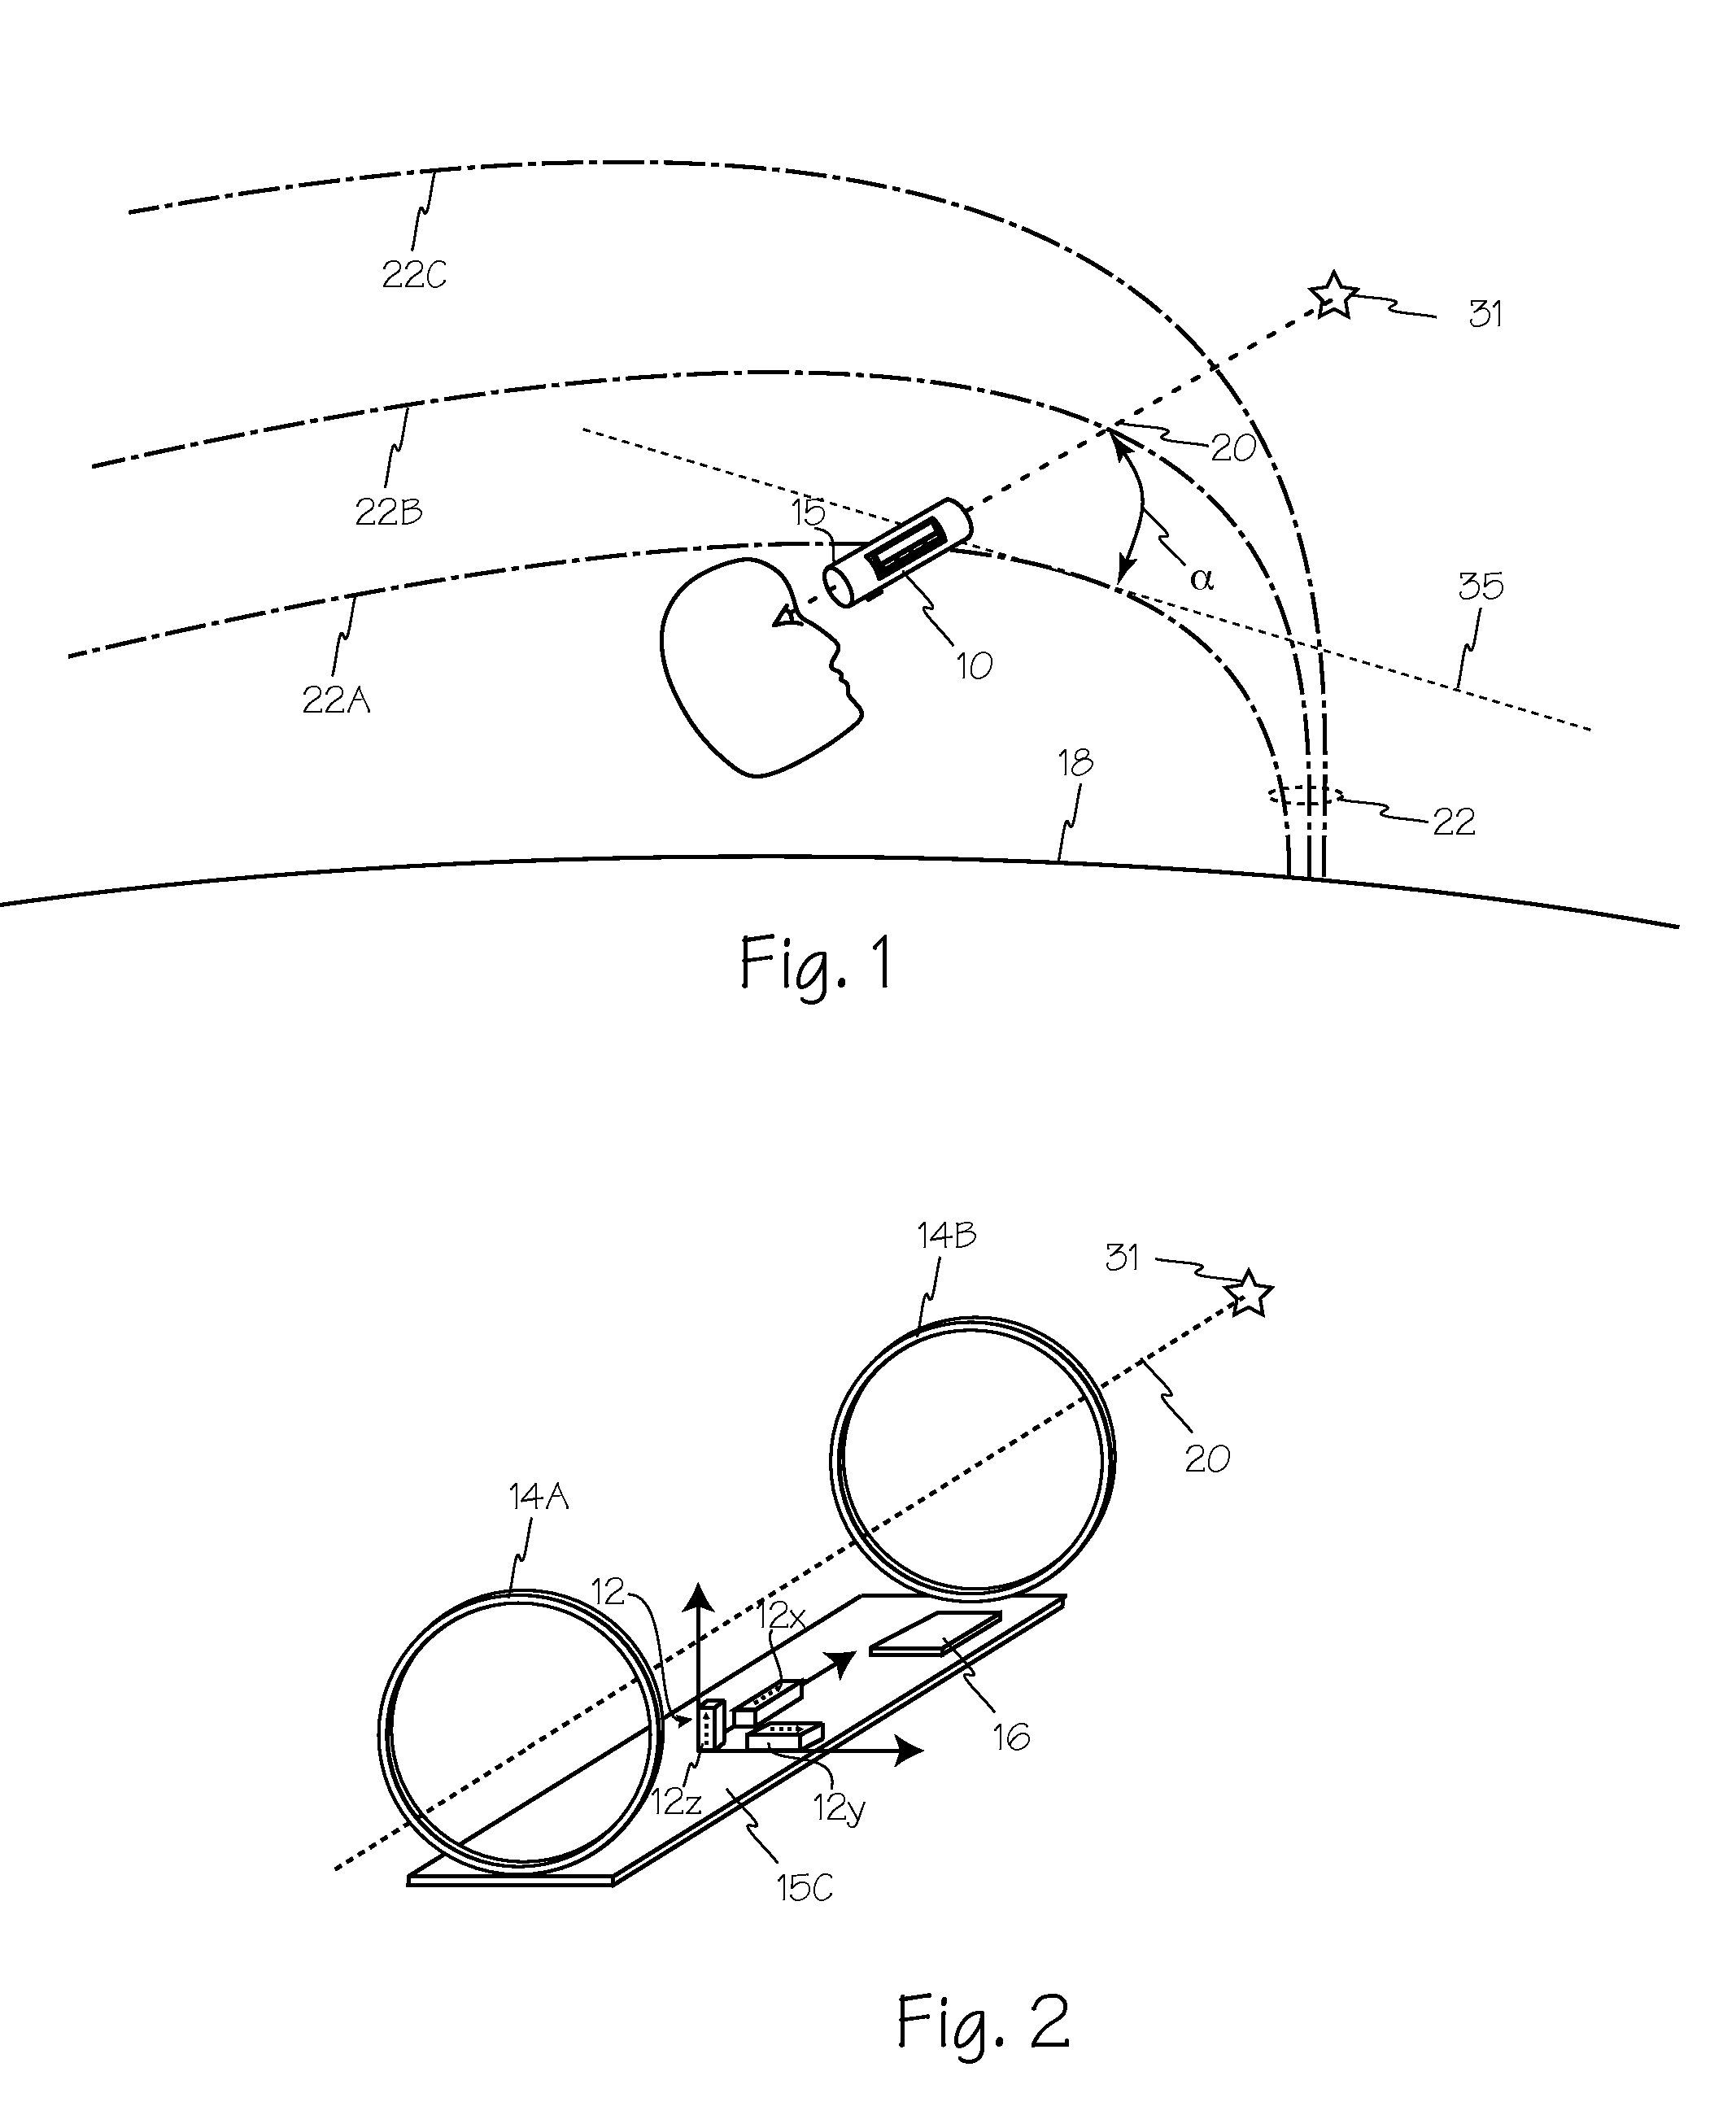 Method and Apparatus for Magnetic Field Sensor Calibration